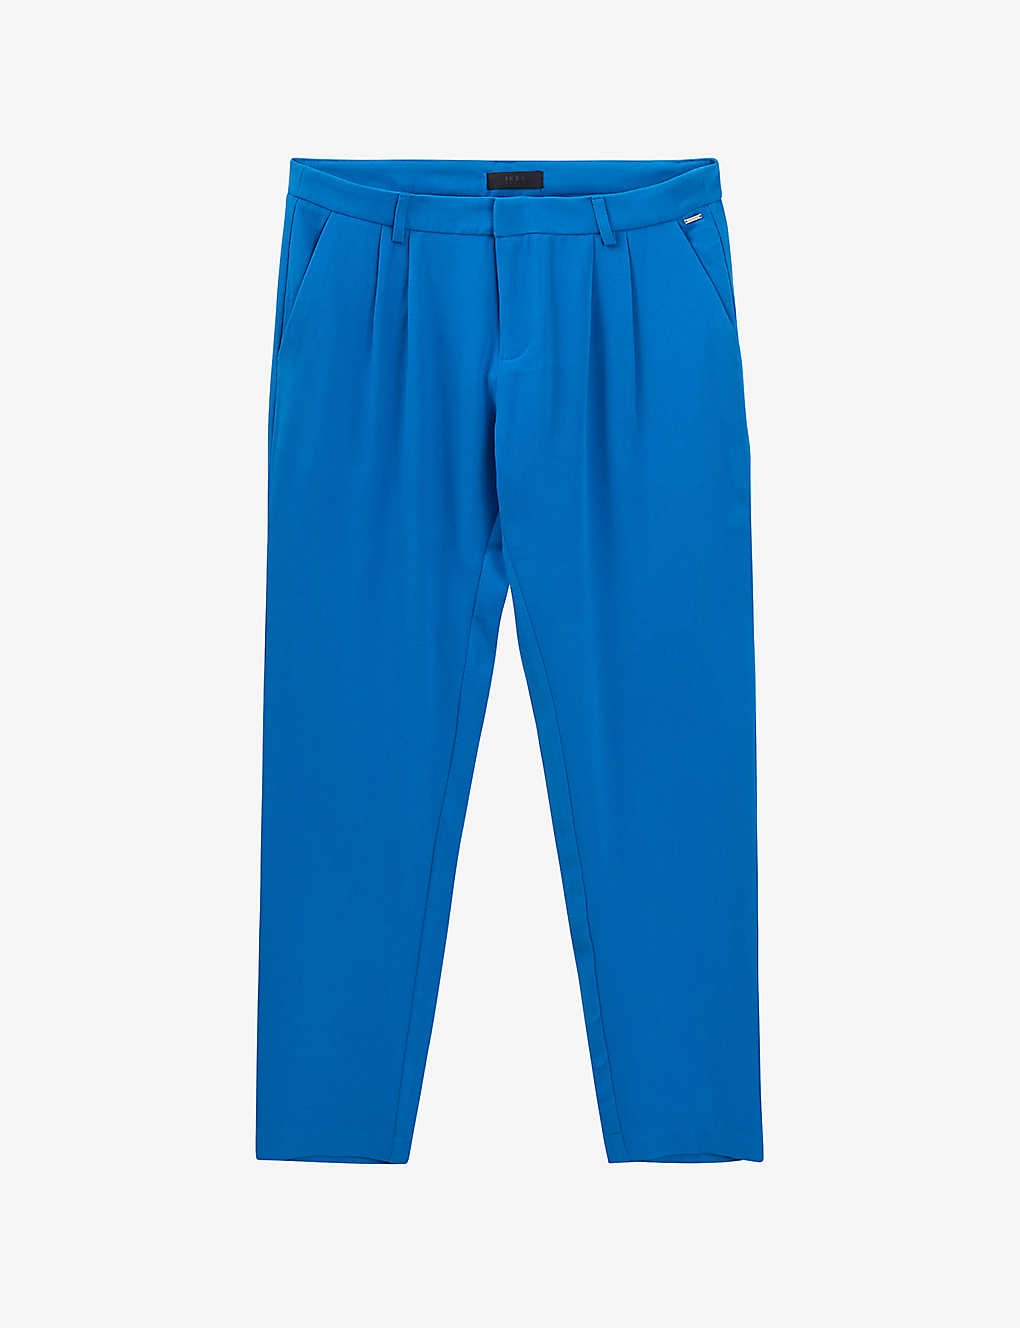 Ikks Womens Bright Blue Straight-leg Mid-rise Darted Woven Trousers